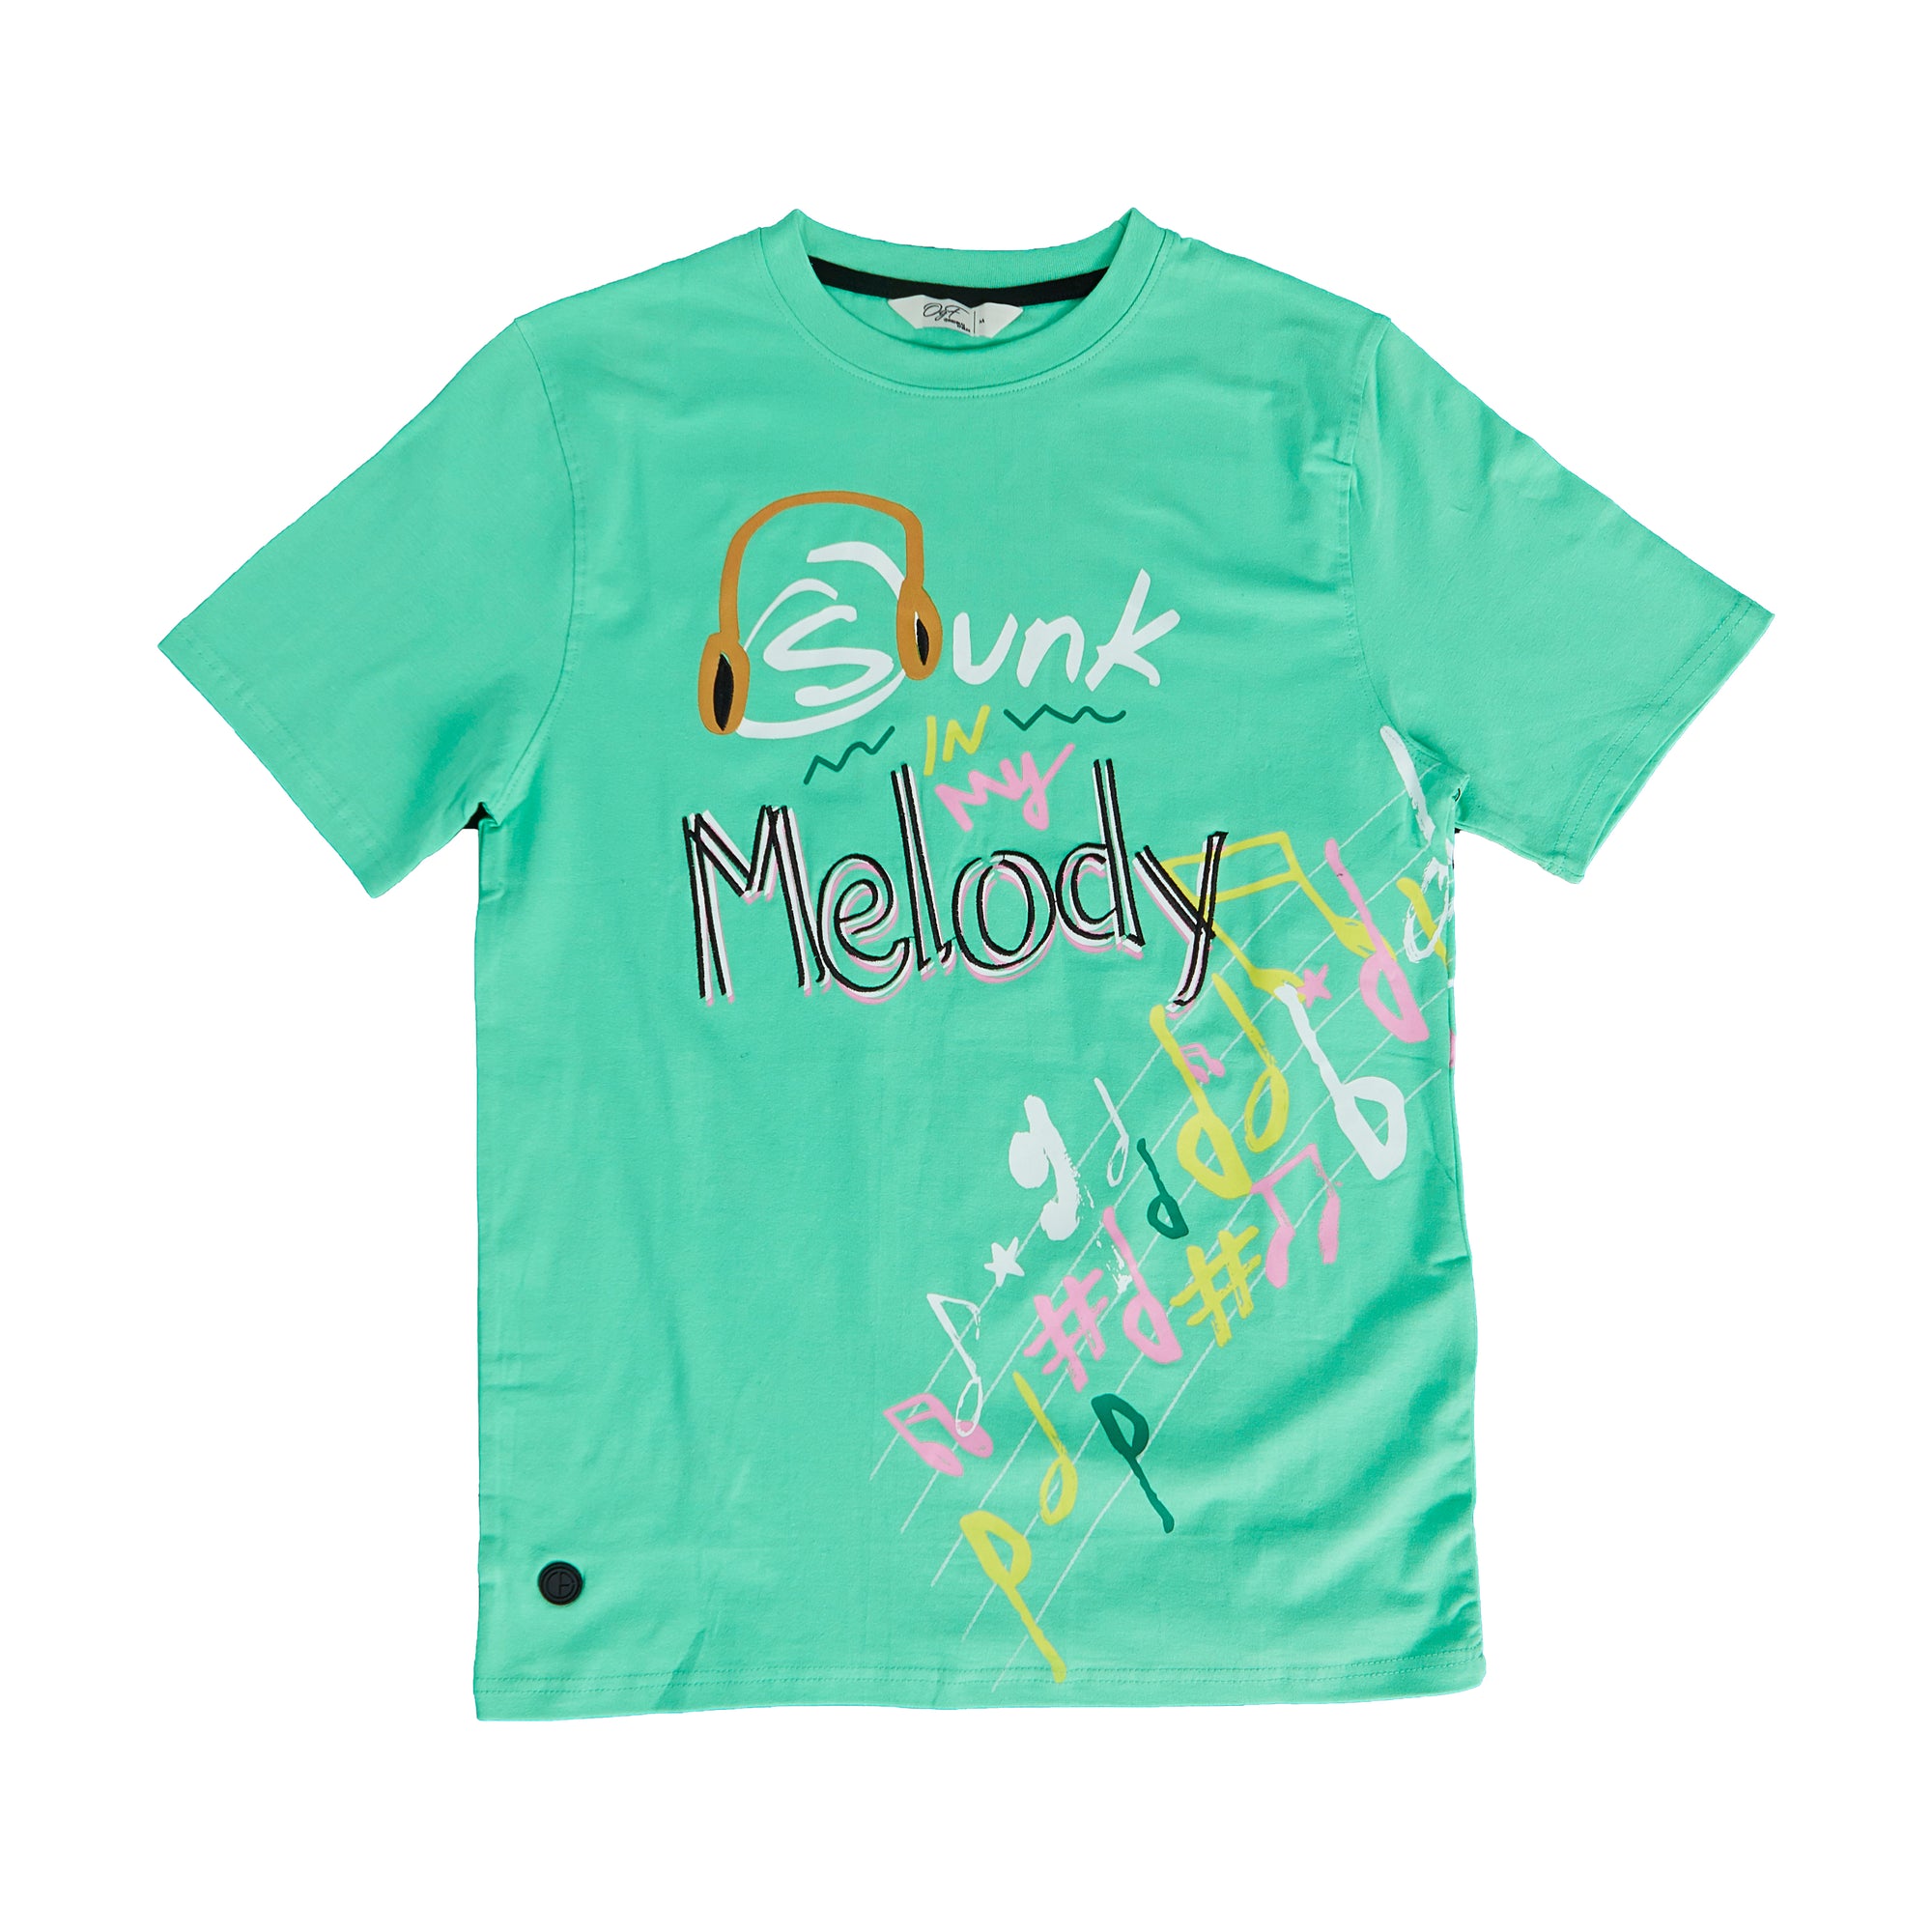 My Melody Tee (Green)